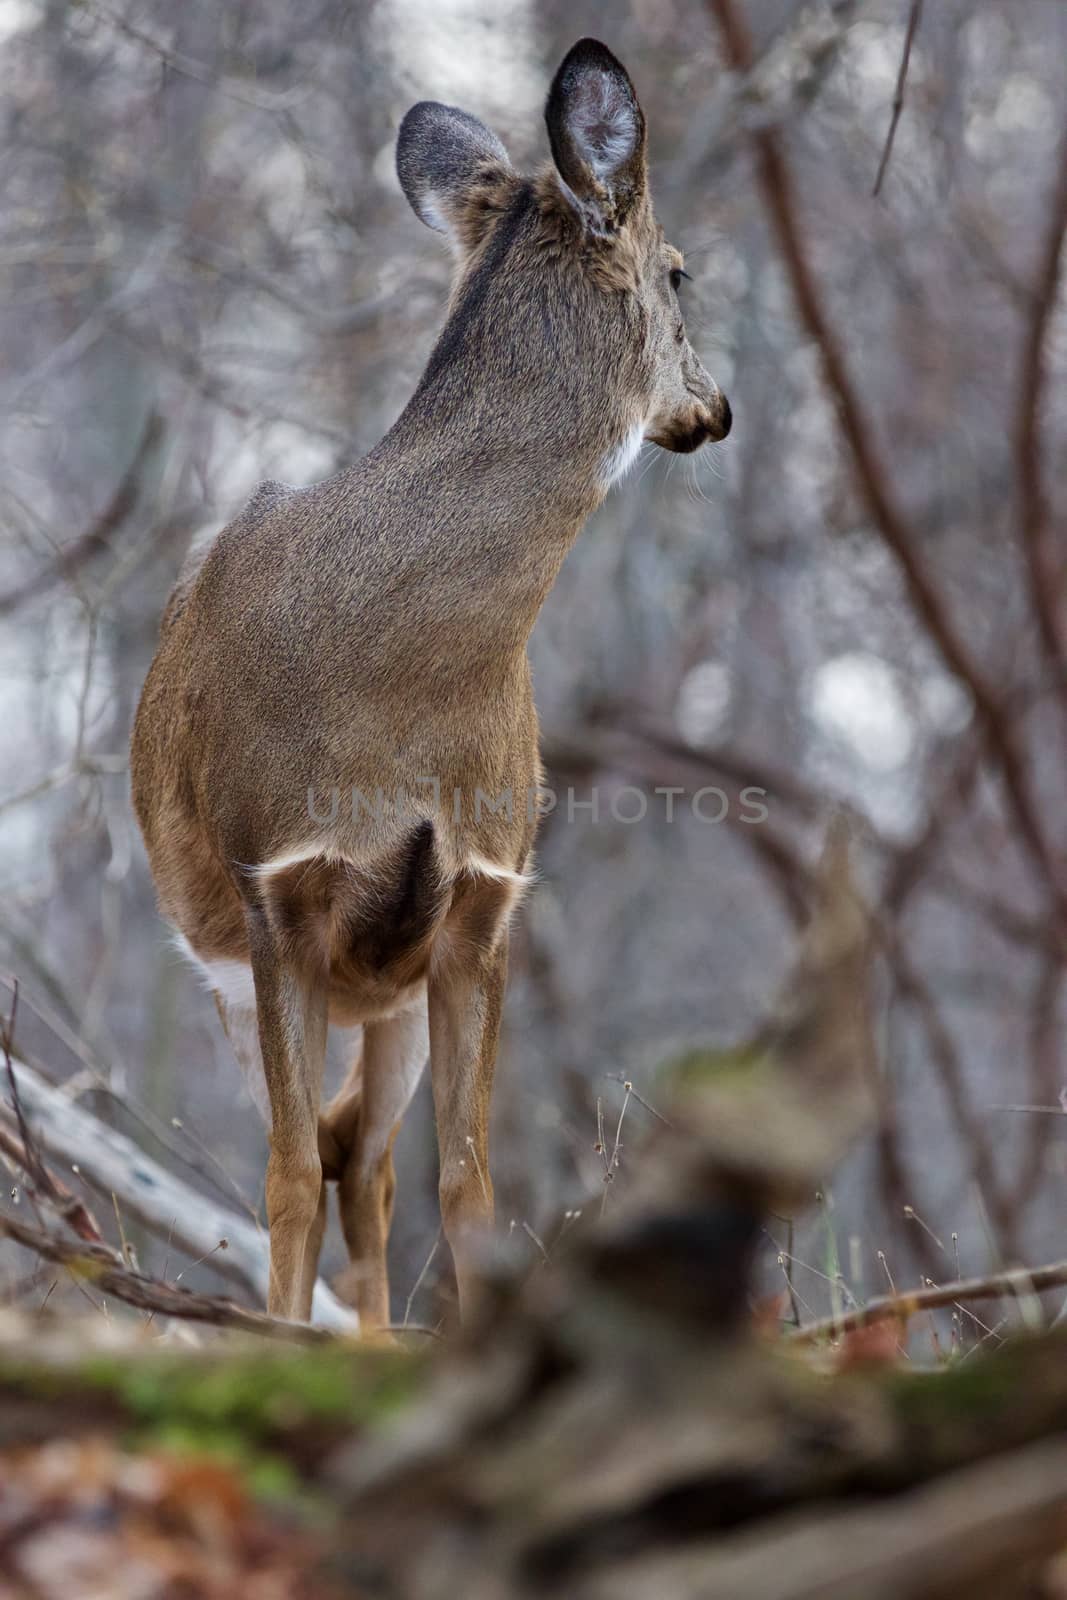 Beautiful picture of a wild deer in the forest